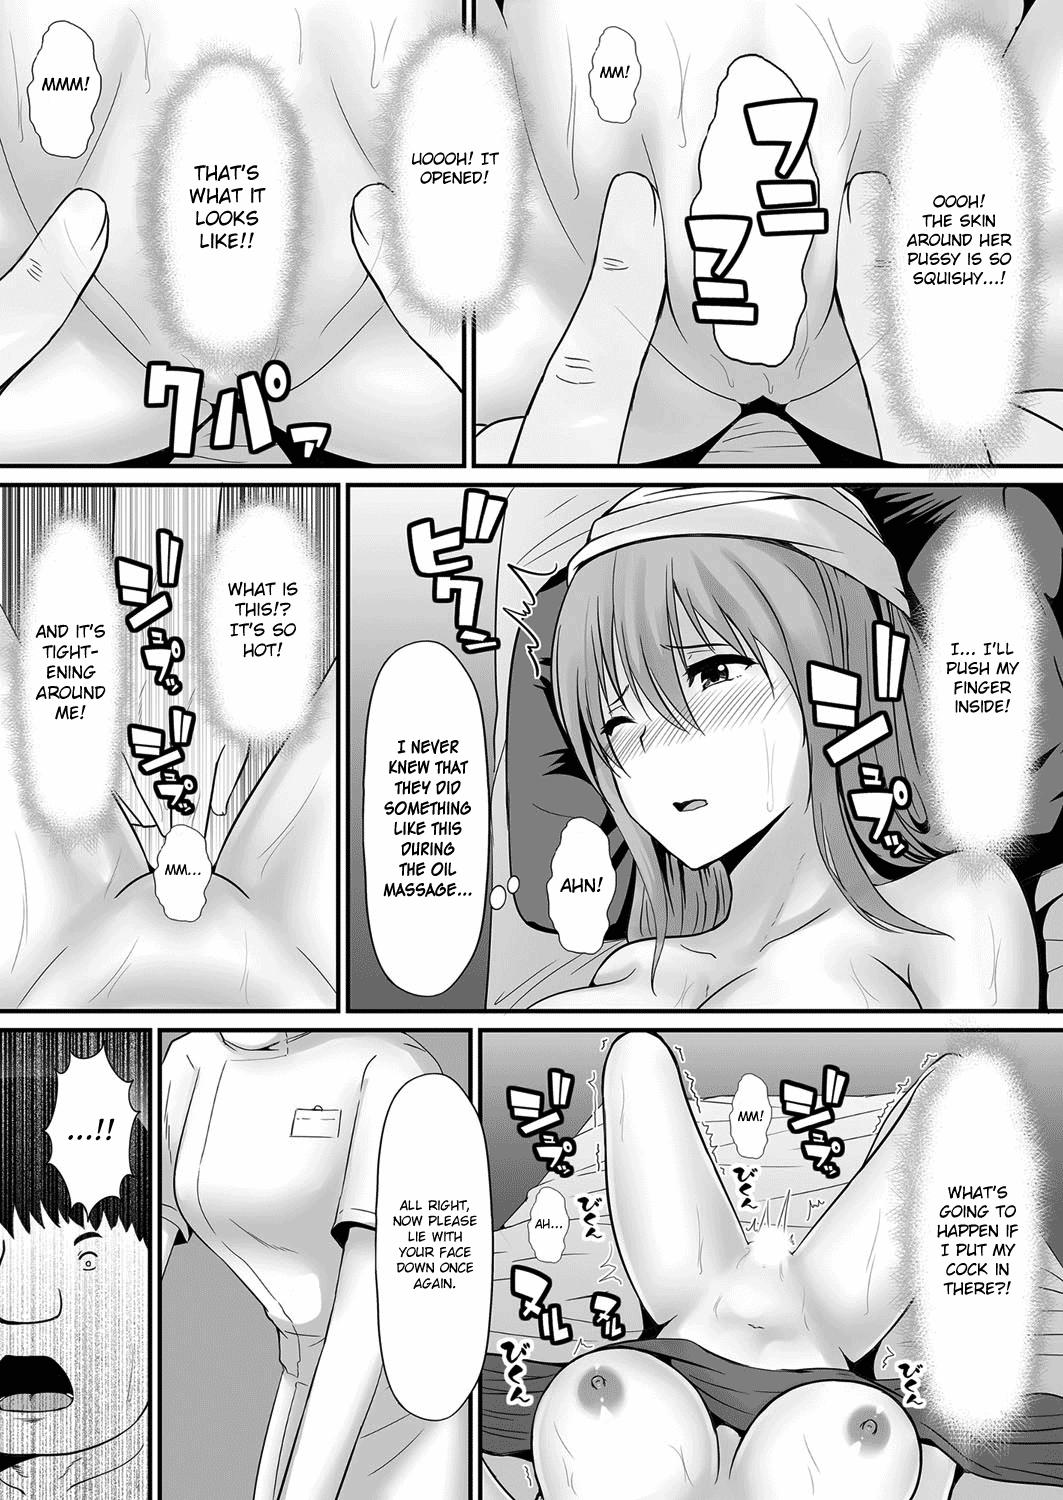 Toy Ecchi na Hatsumei de... Mechakucha Sex Shitemita! 1 | I Used Perverted Inventions... To Have Crazy Sex! 1 Girl Get Fuck - Page 11